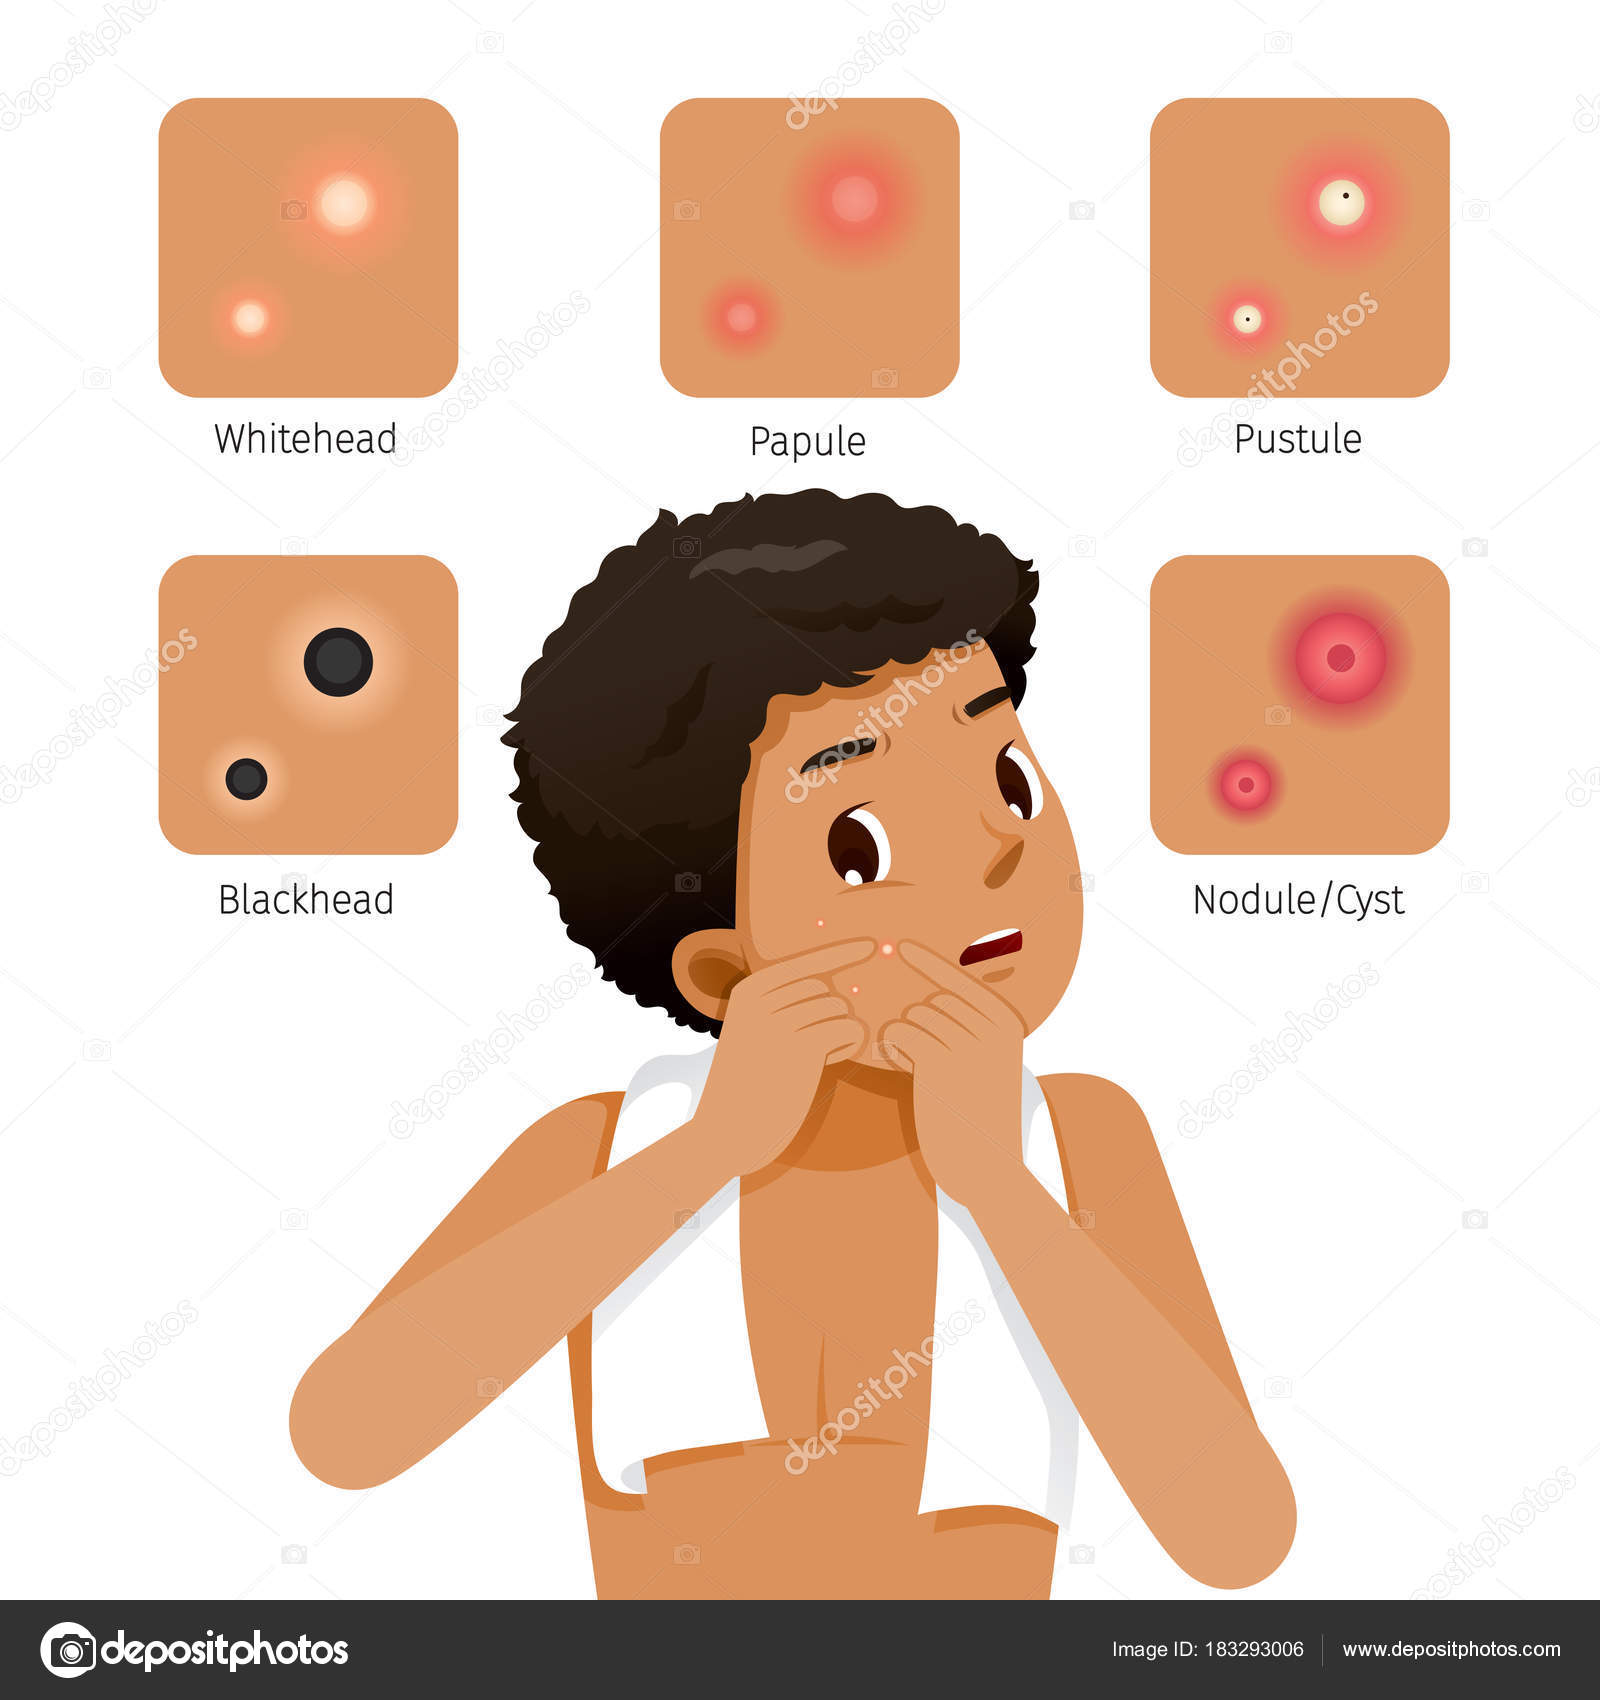 Acne Types And Tanned Skin Man With Acne On Face Stock Vector C Matoommi